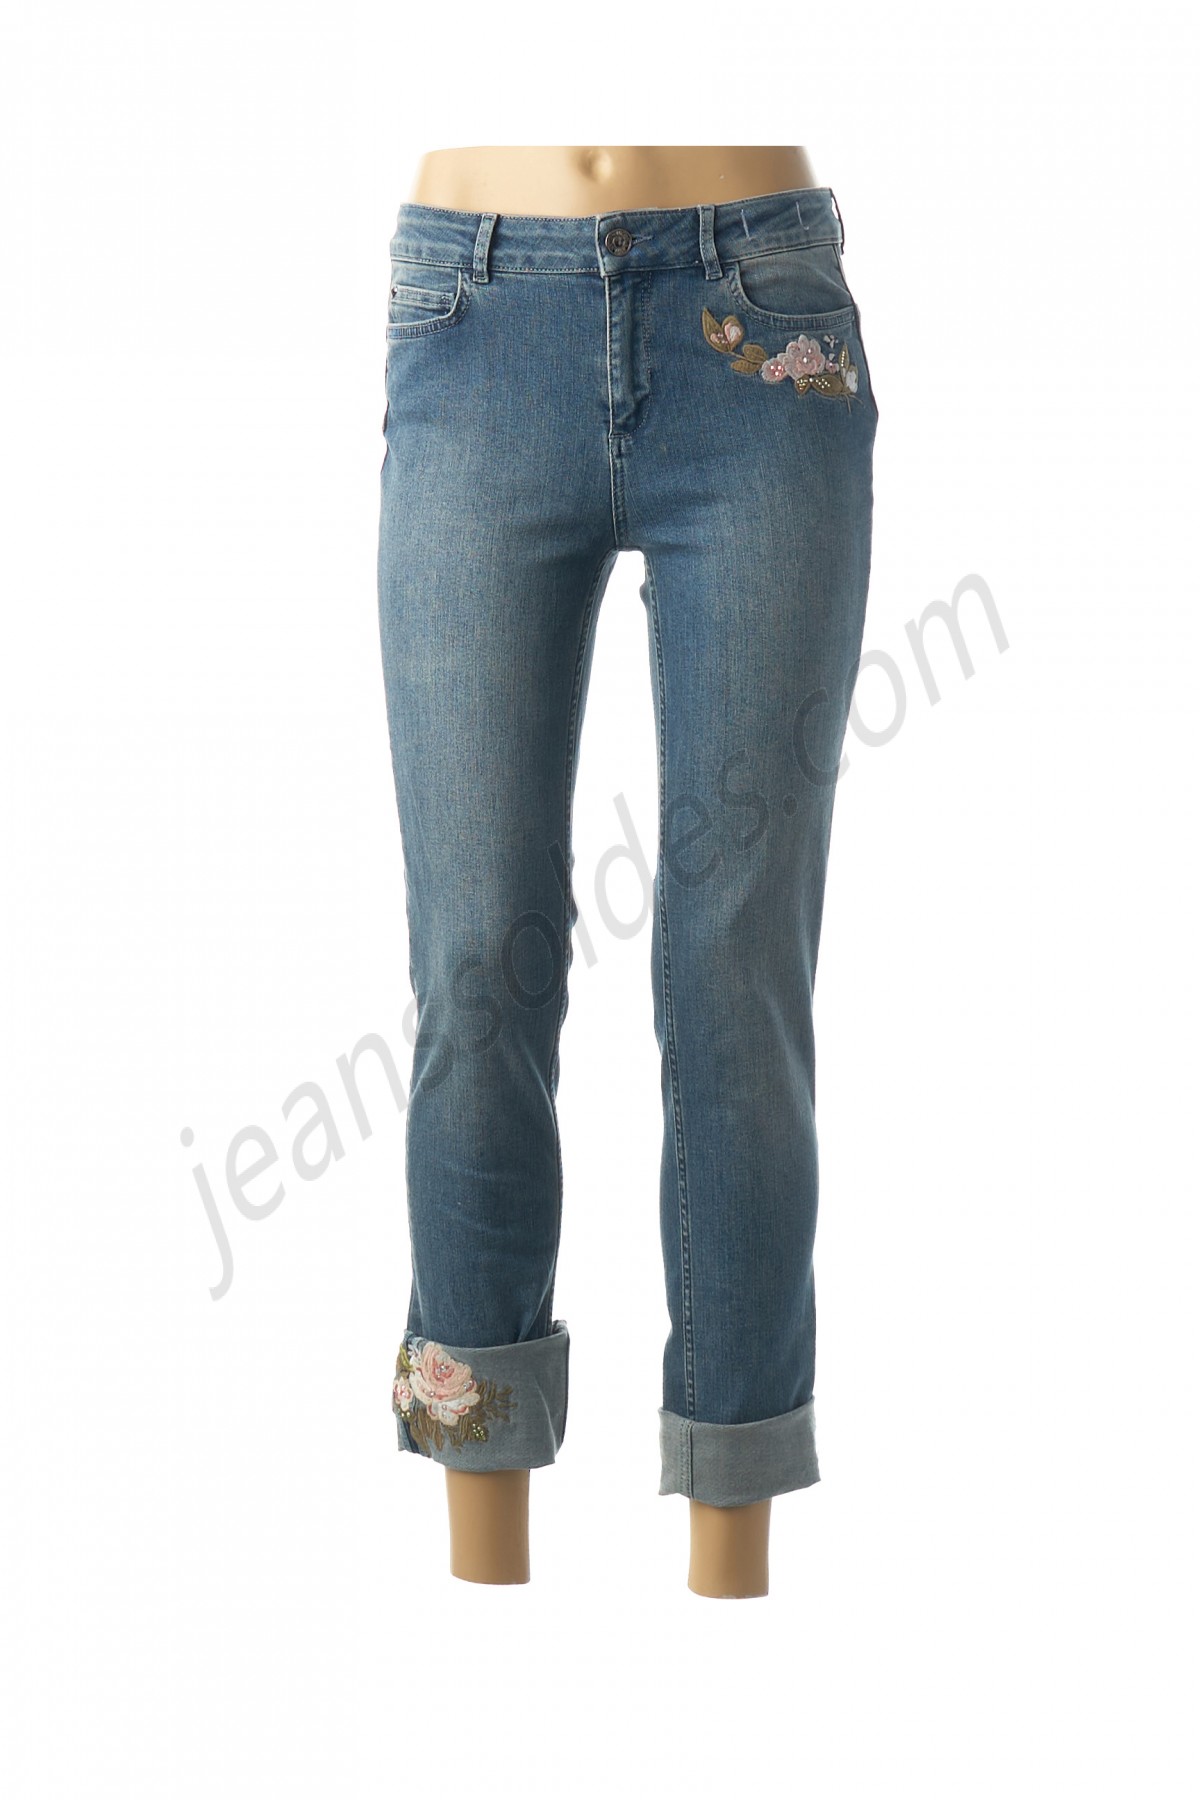 my twin-Jeans coupe slim prix d’amis - -0